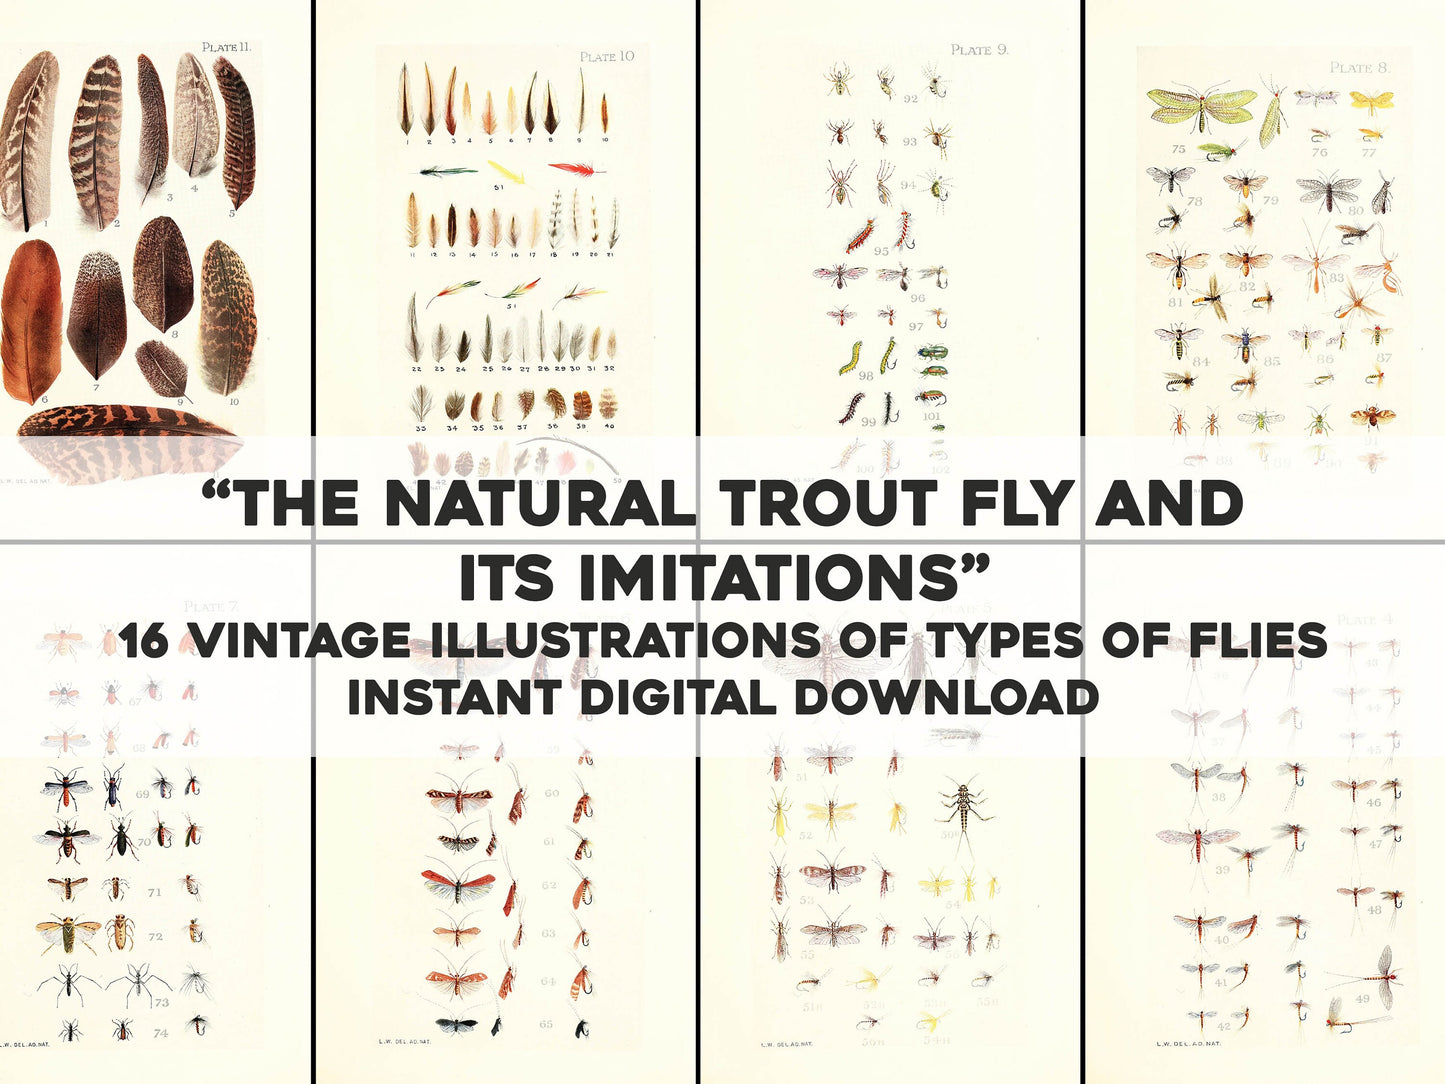 The Natural Trout Fly & its Imitations [16 Images]